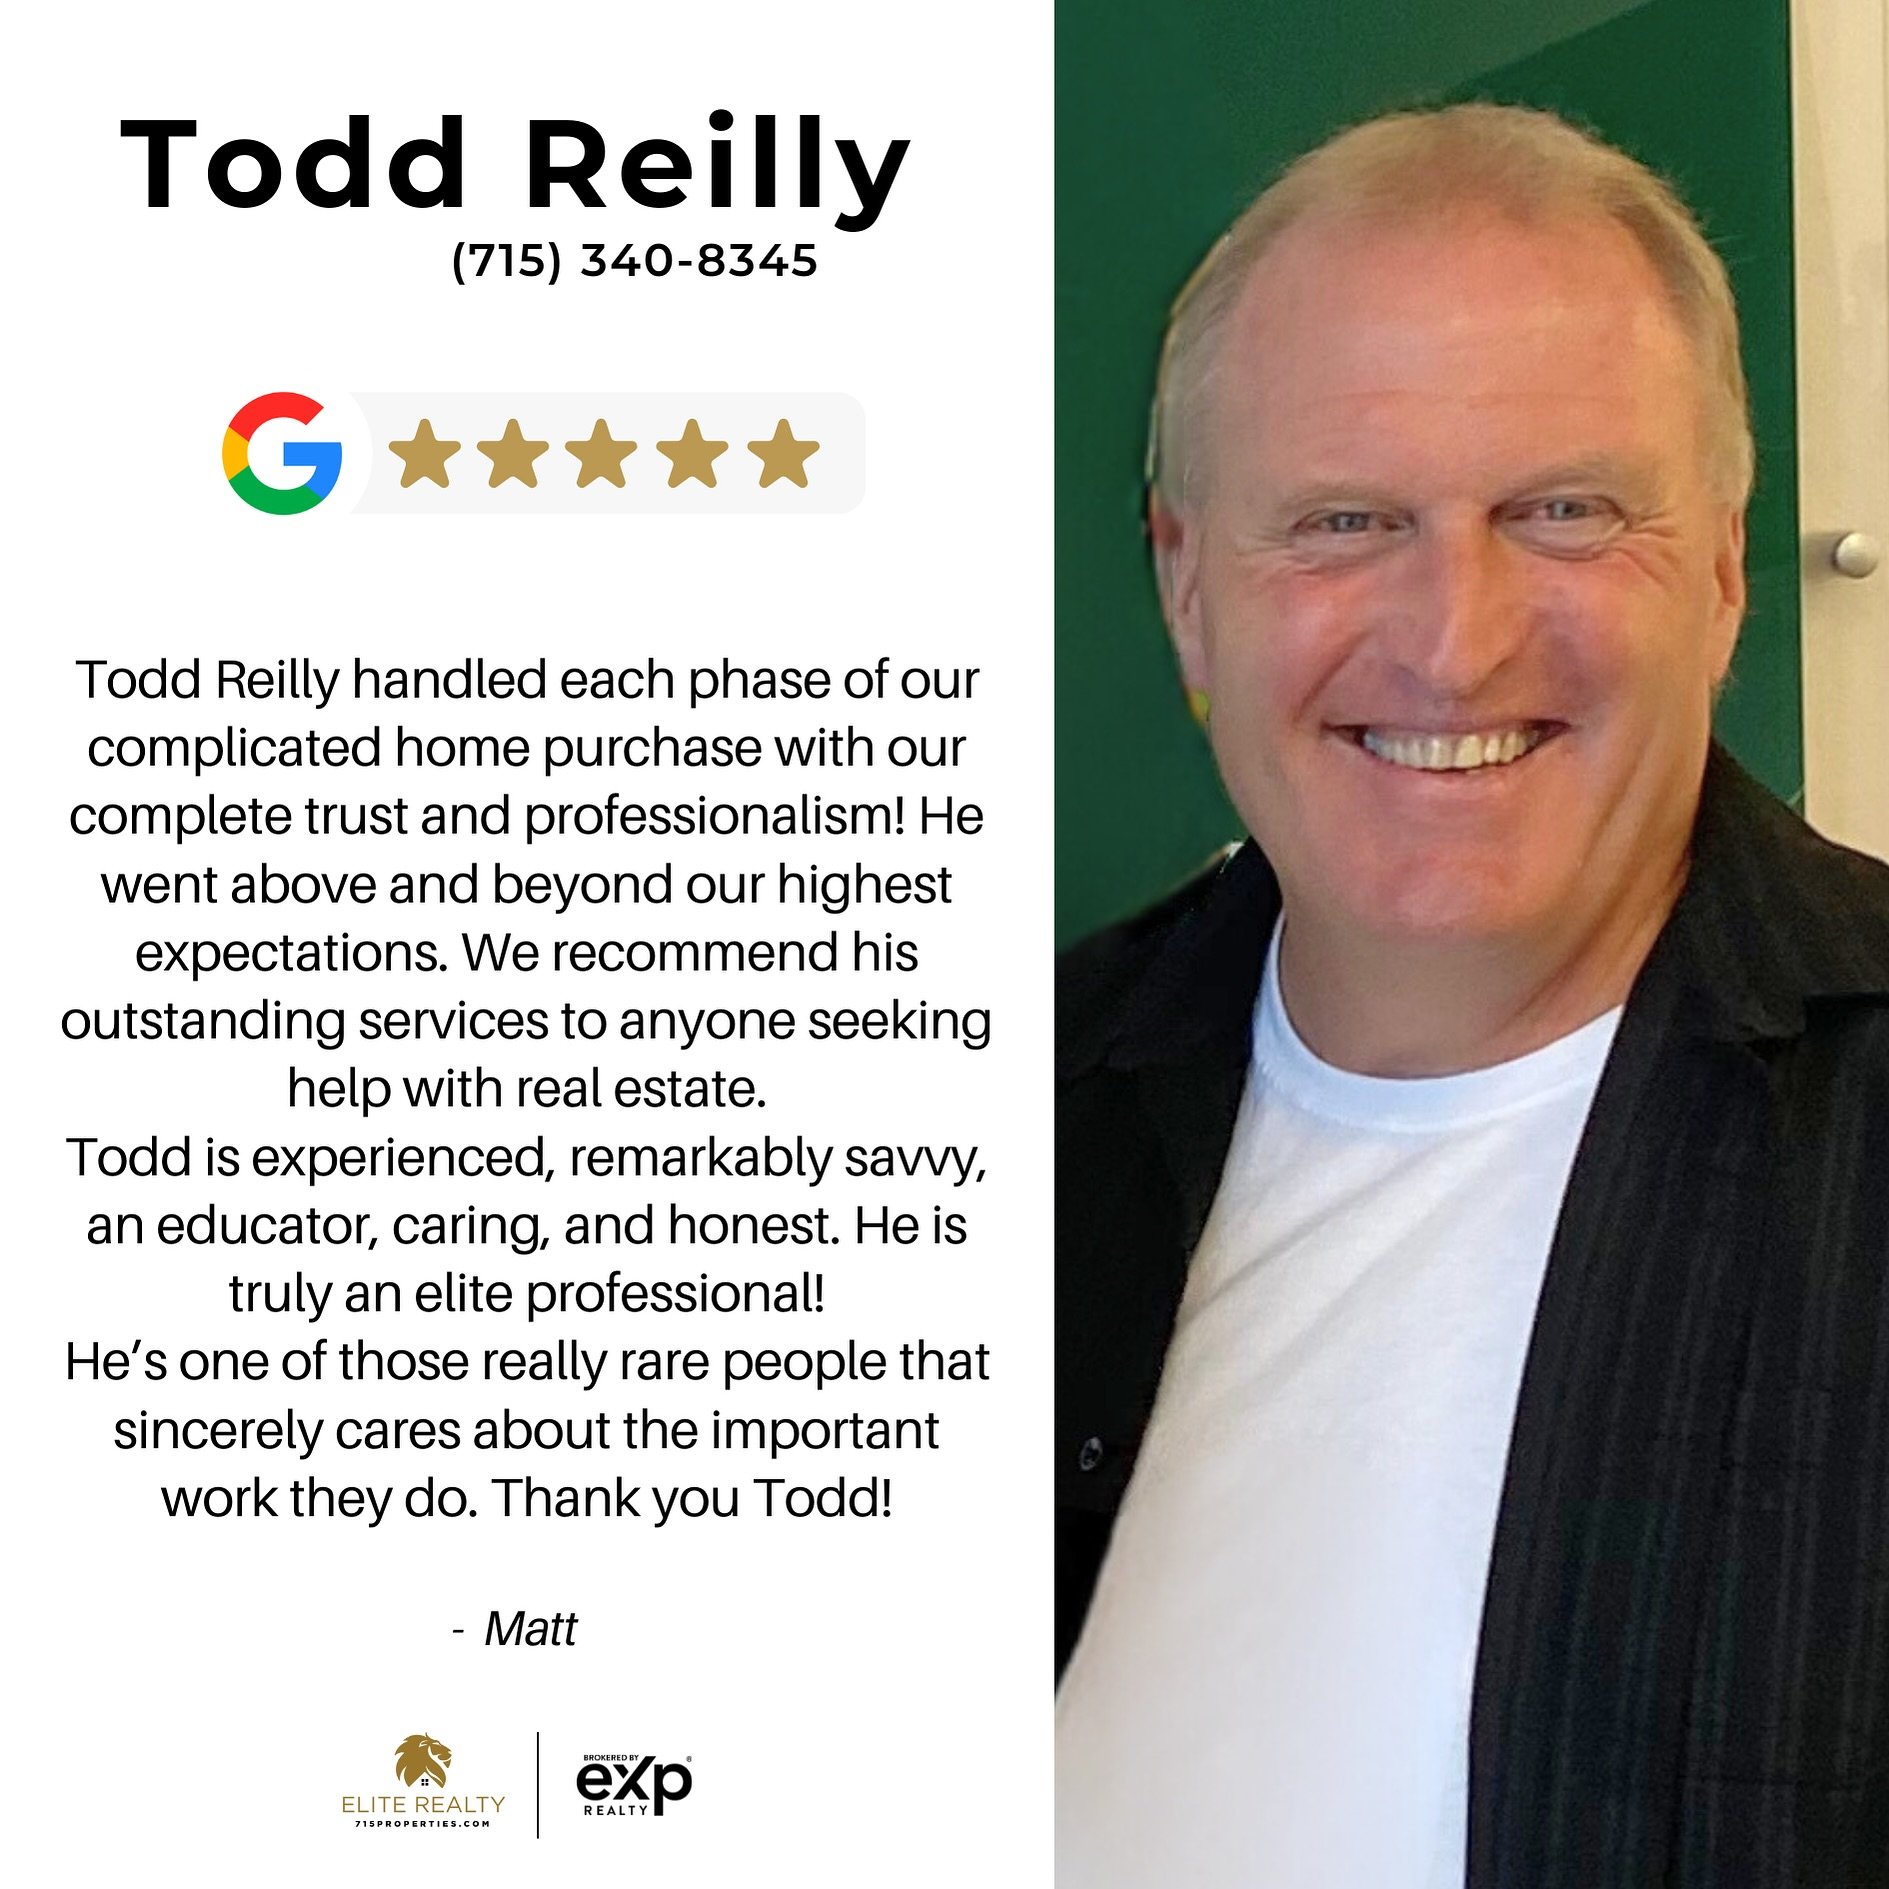 &ldquo;Todd Reilly handled each phase of our complicated home purchase with our complete trust and professionalism! He went above and beyond our highest expectations. We recommend his outstanding services to anyone seeking help with real estate. Todd